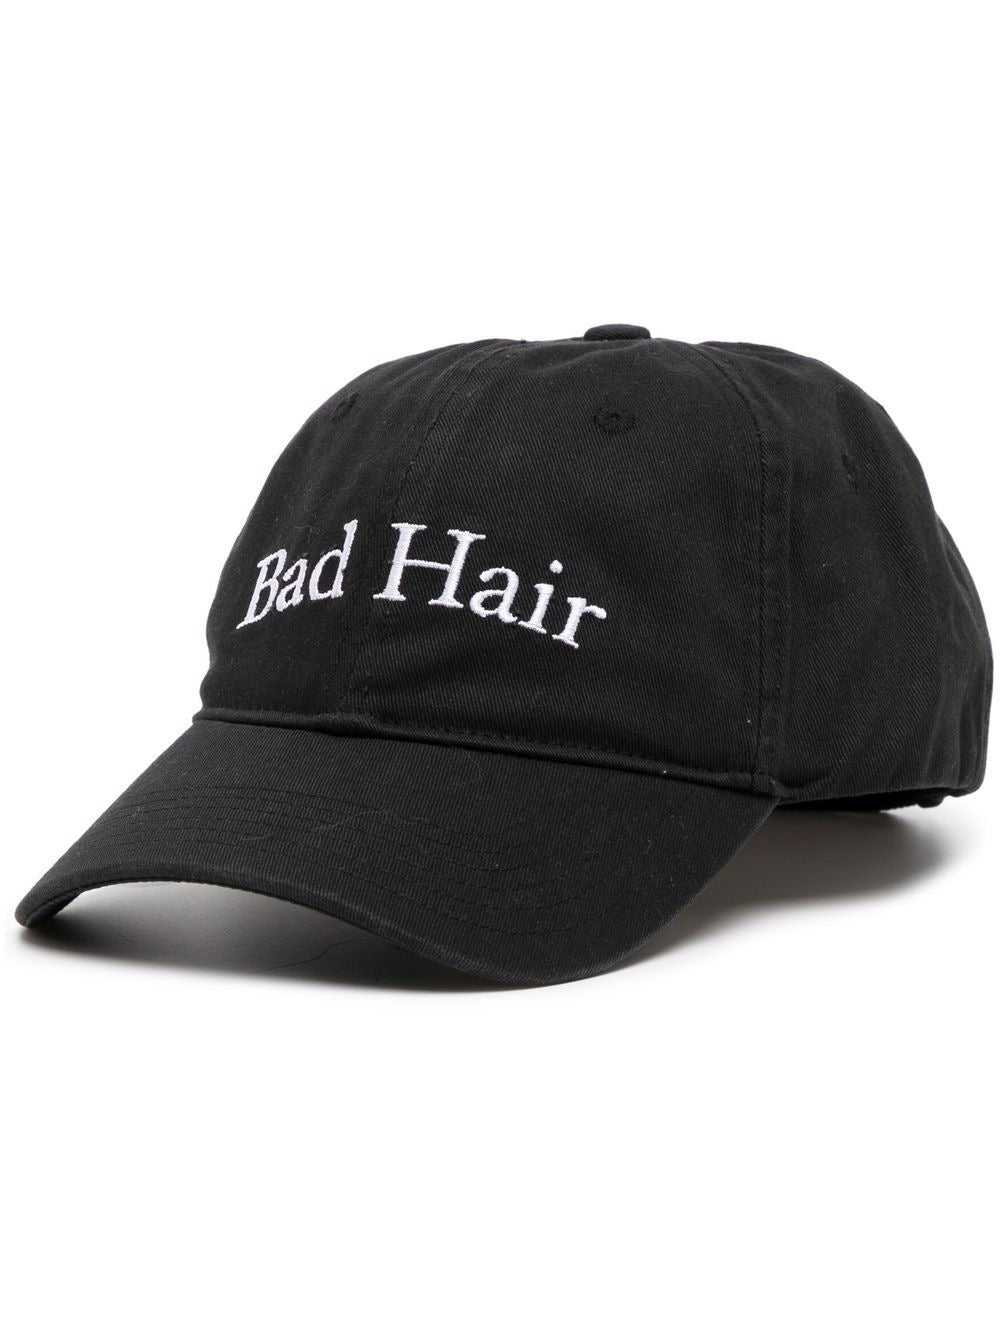 Bad Hair Embroidery Washed Cap